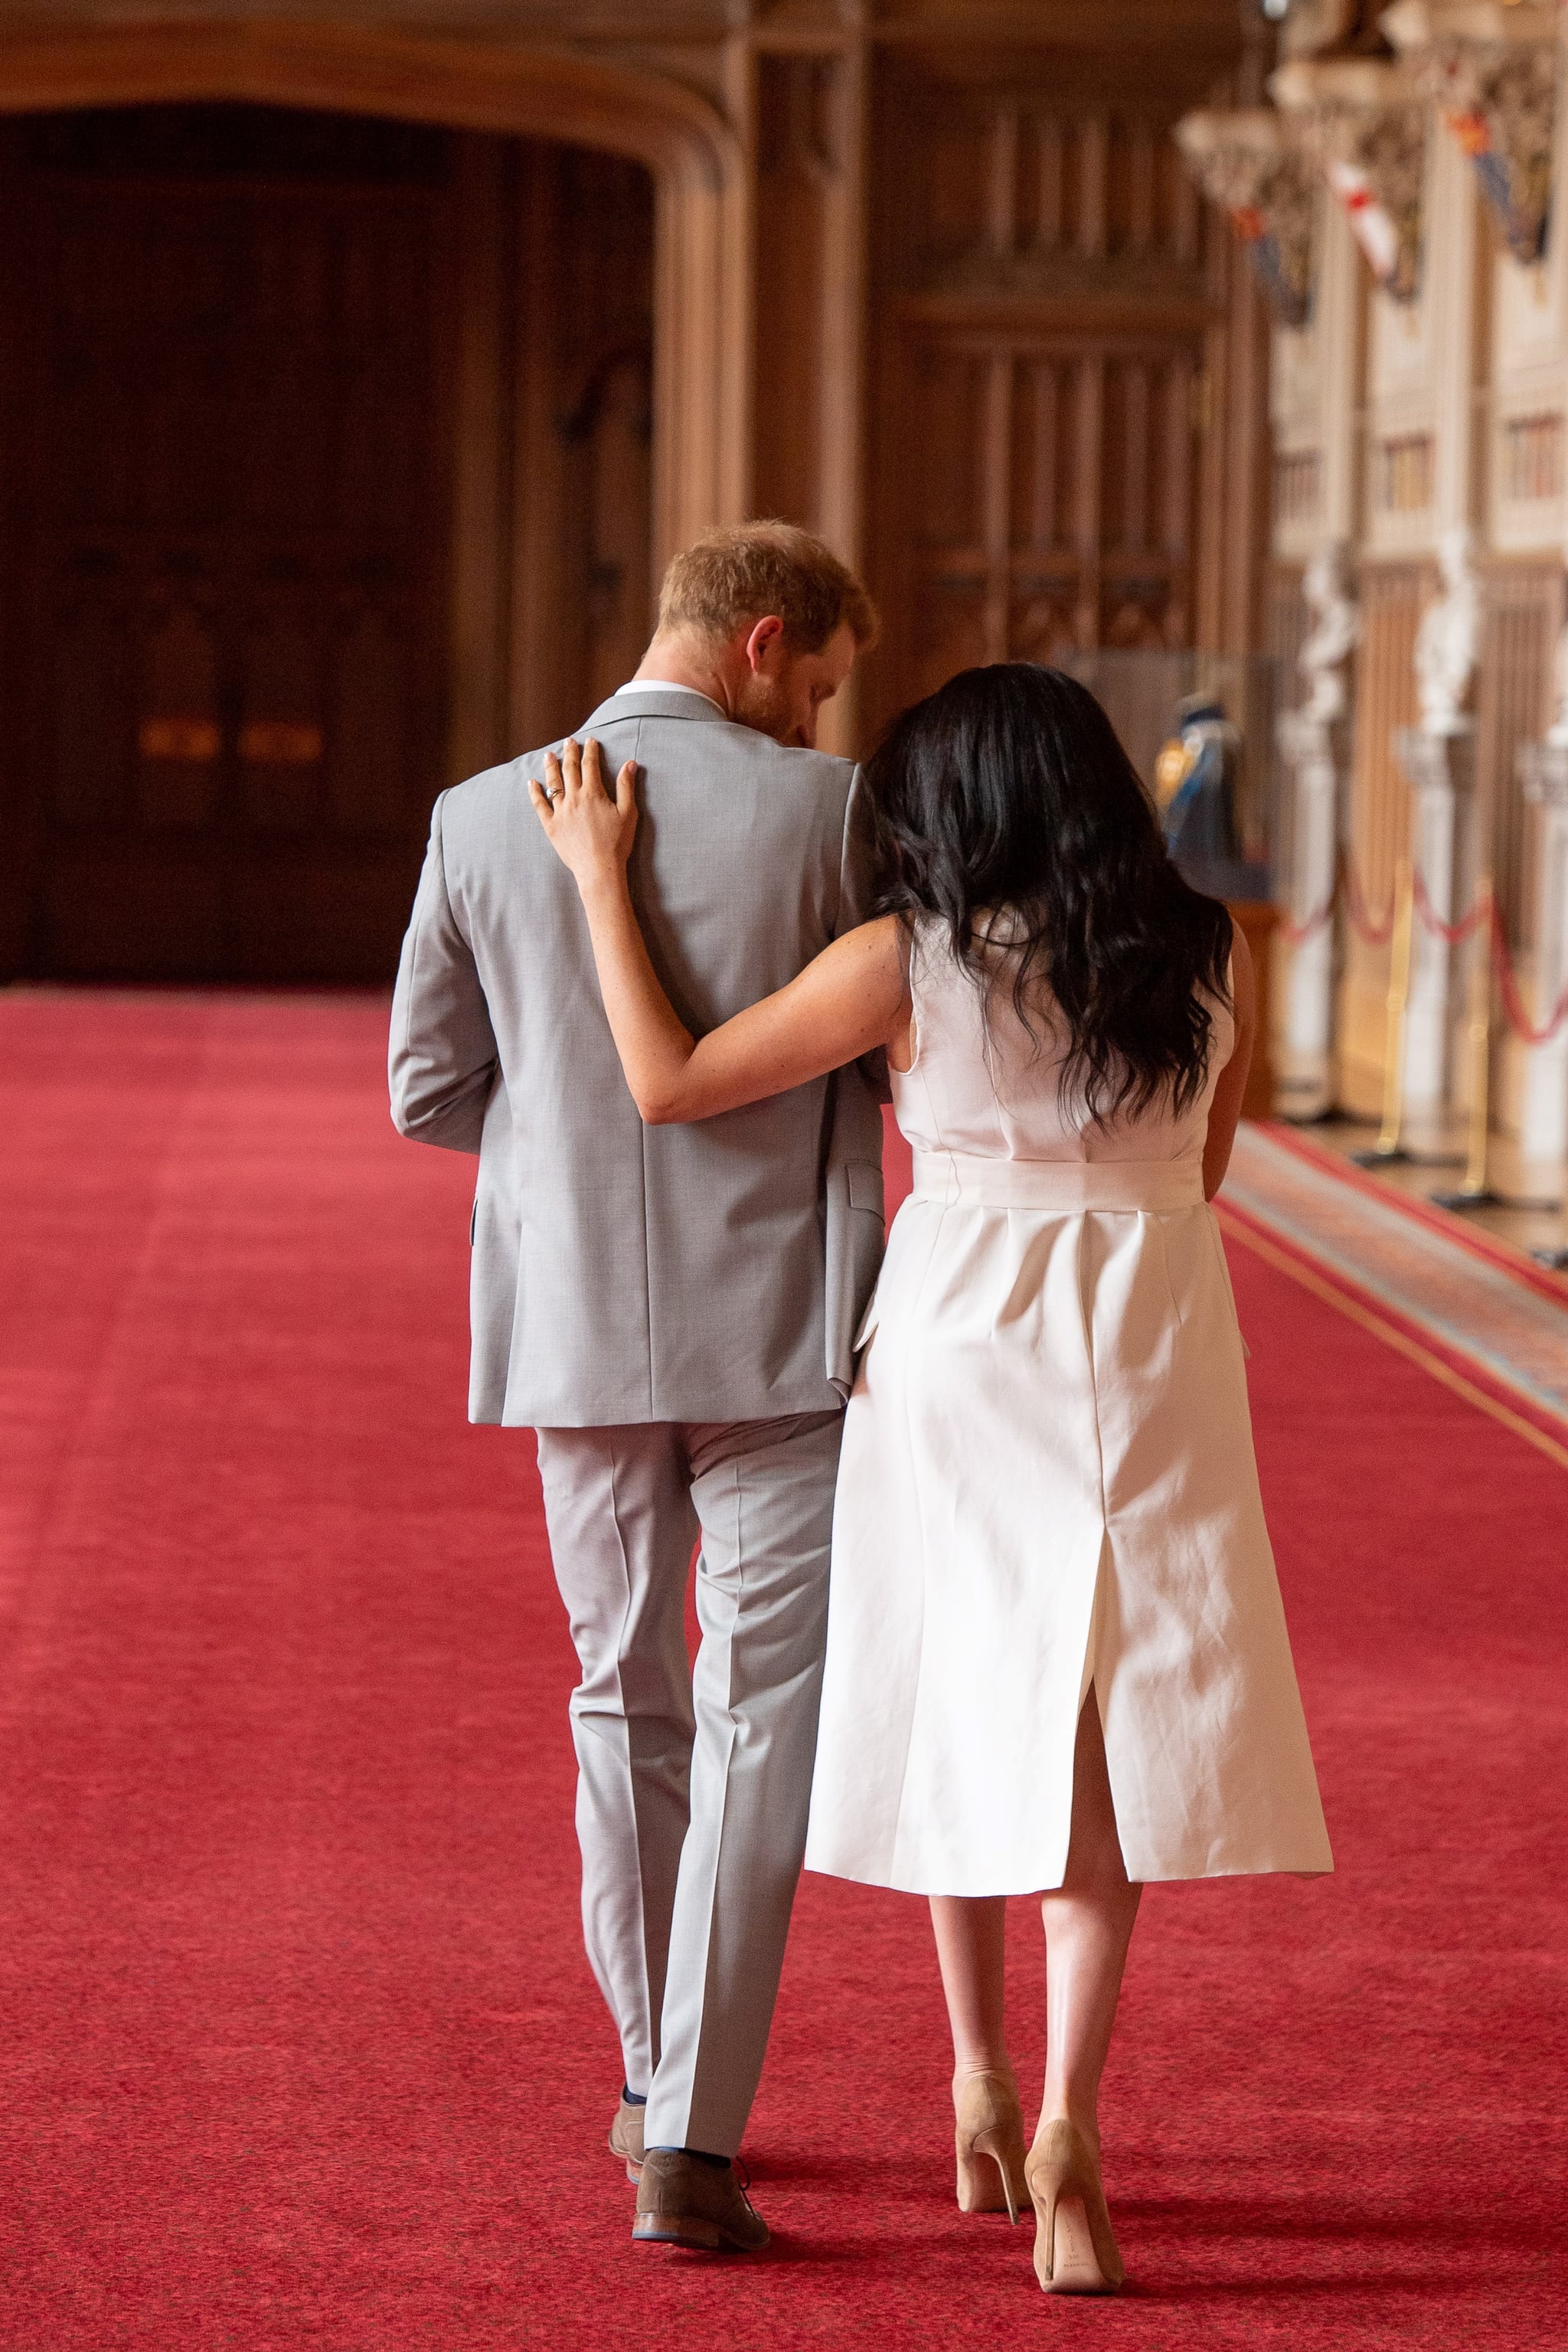 TOPSHOT - Britain's Prince Harry, Duke of Sussex (L), and his wife Meghan, Duchess of Sussex, walk away after posing for photographs with their newborn baby son, Archie Harrison Mountbatten-Windsor, in St George's Hall at Windsor Castle in Windsor, west of London on May 8, 2019. (Photo by Dominic Lipinski / POOL / AFP) (Photo by DOMINIC LIPINSKI/POOL/AFP via Getty Images)